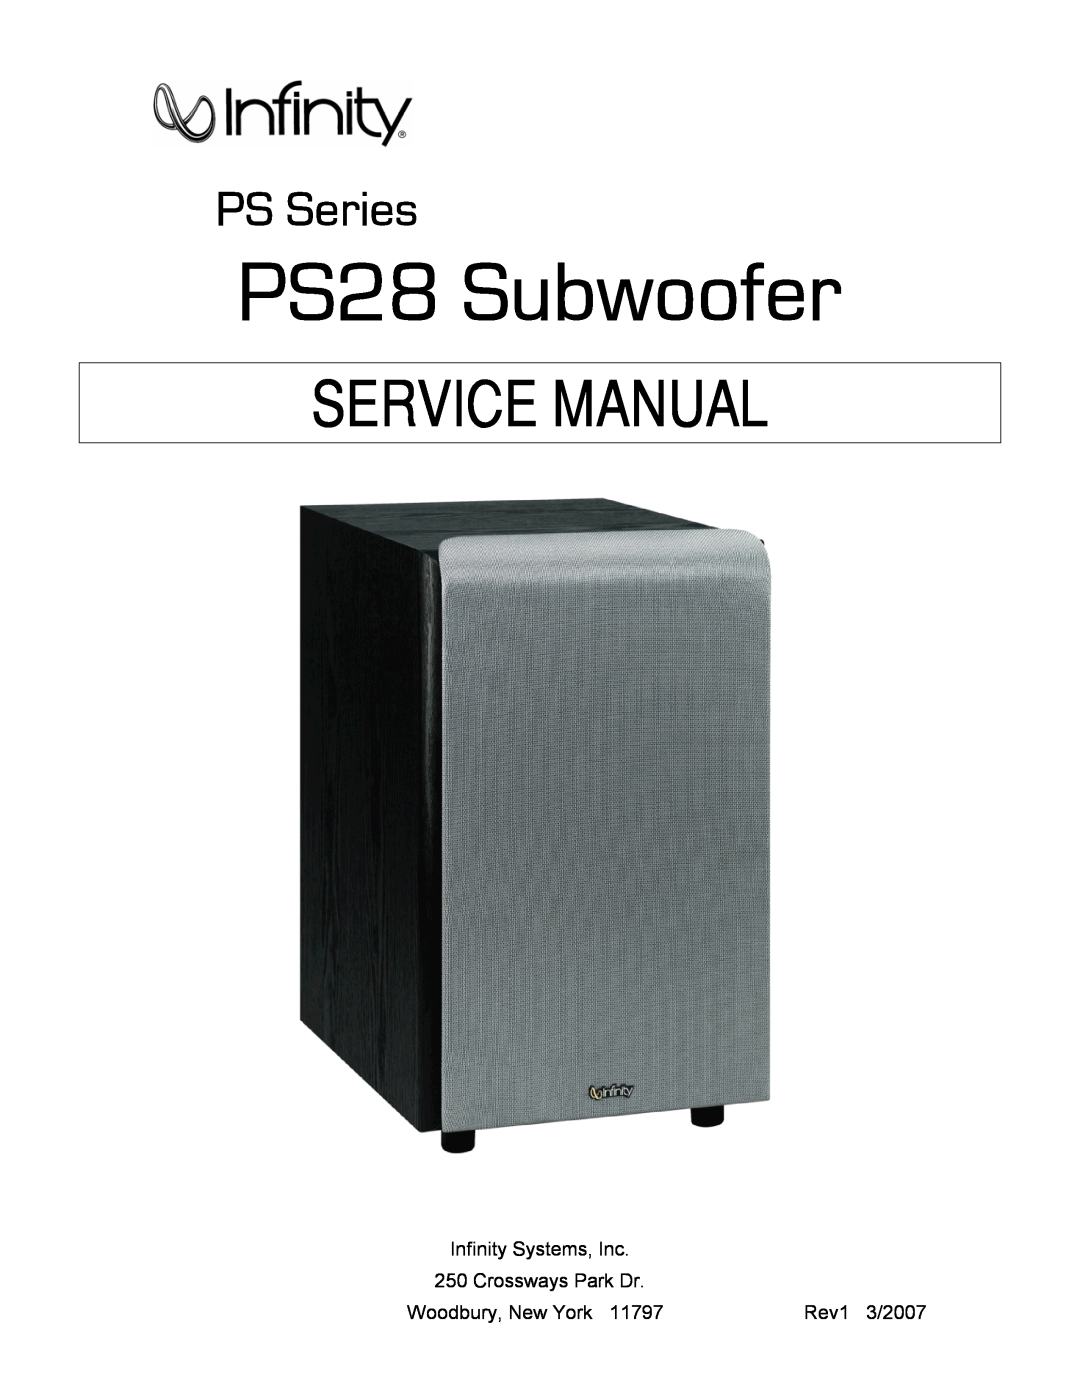 Infinity service manual PS28 Subwoofer, PS Series, Crossways Park Dr 